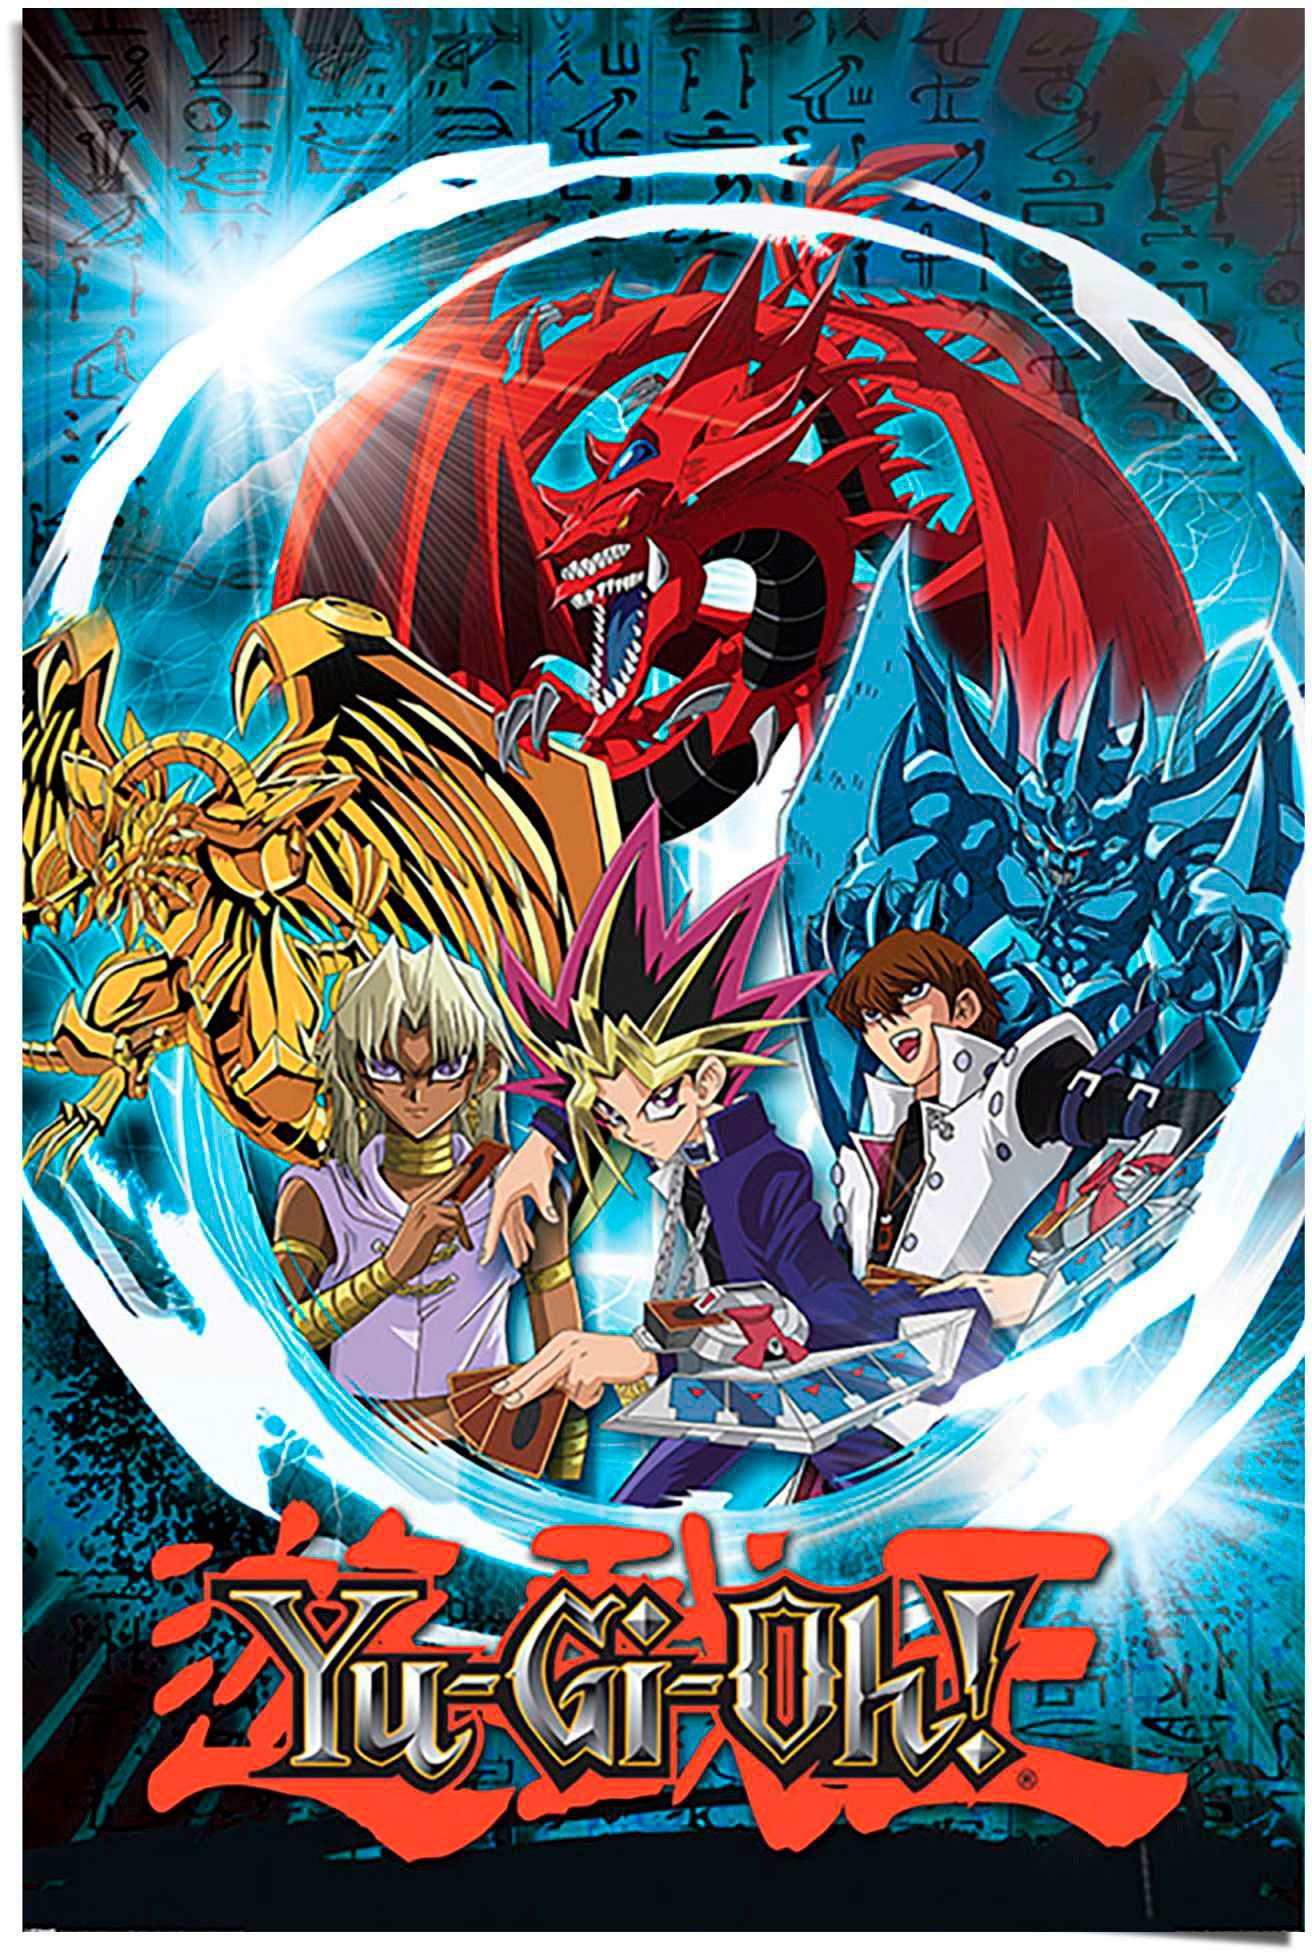 Reinders! Poster Yu-Gi-Oh! - unlimited future